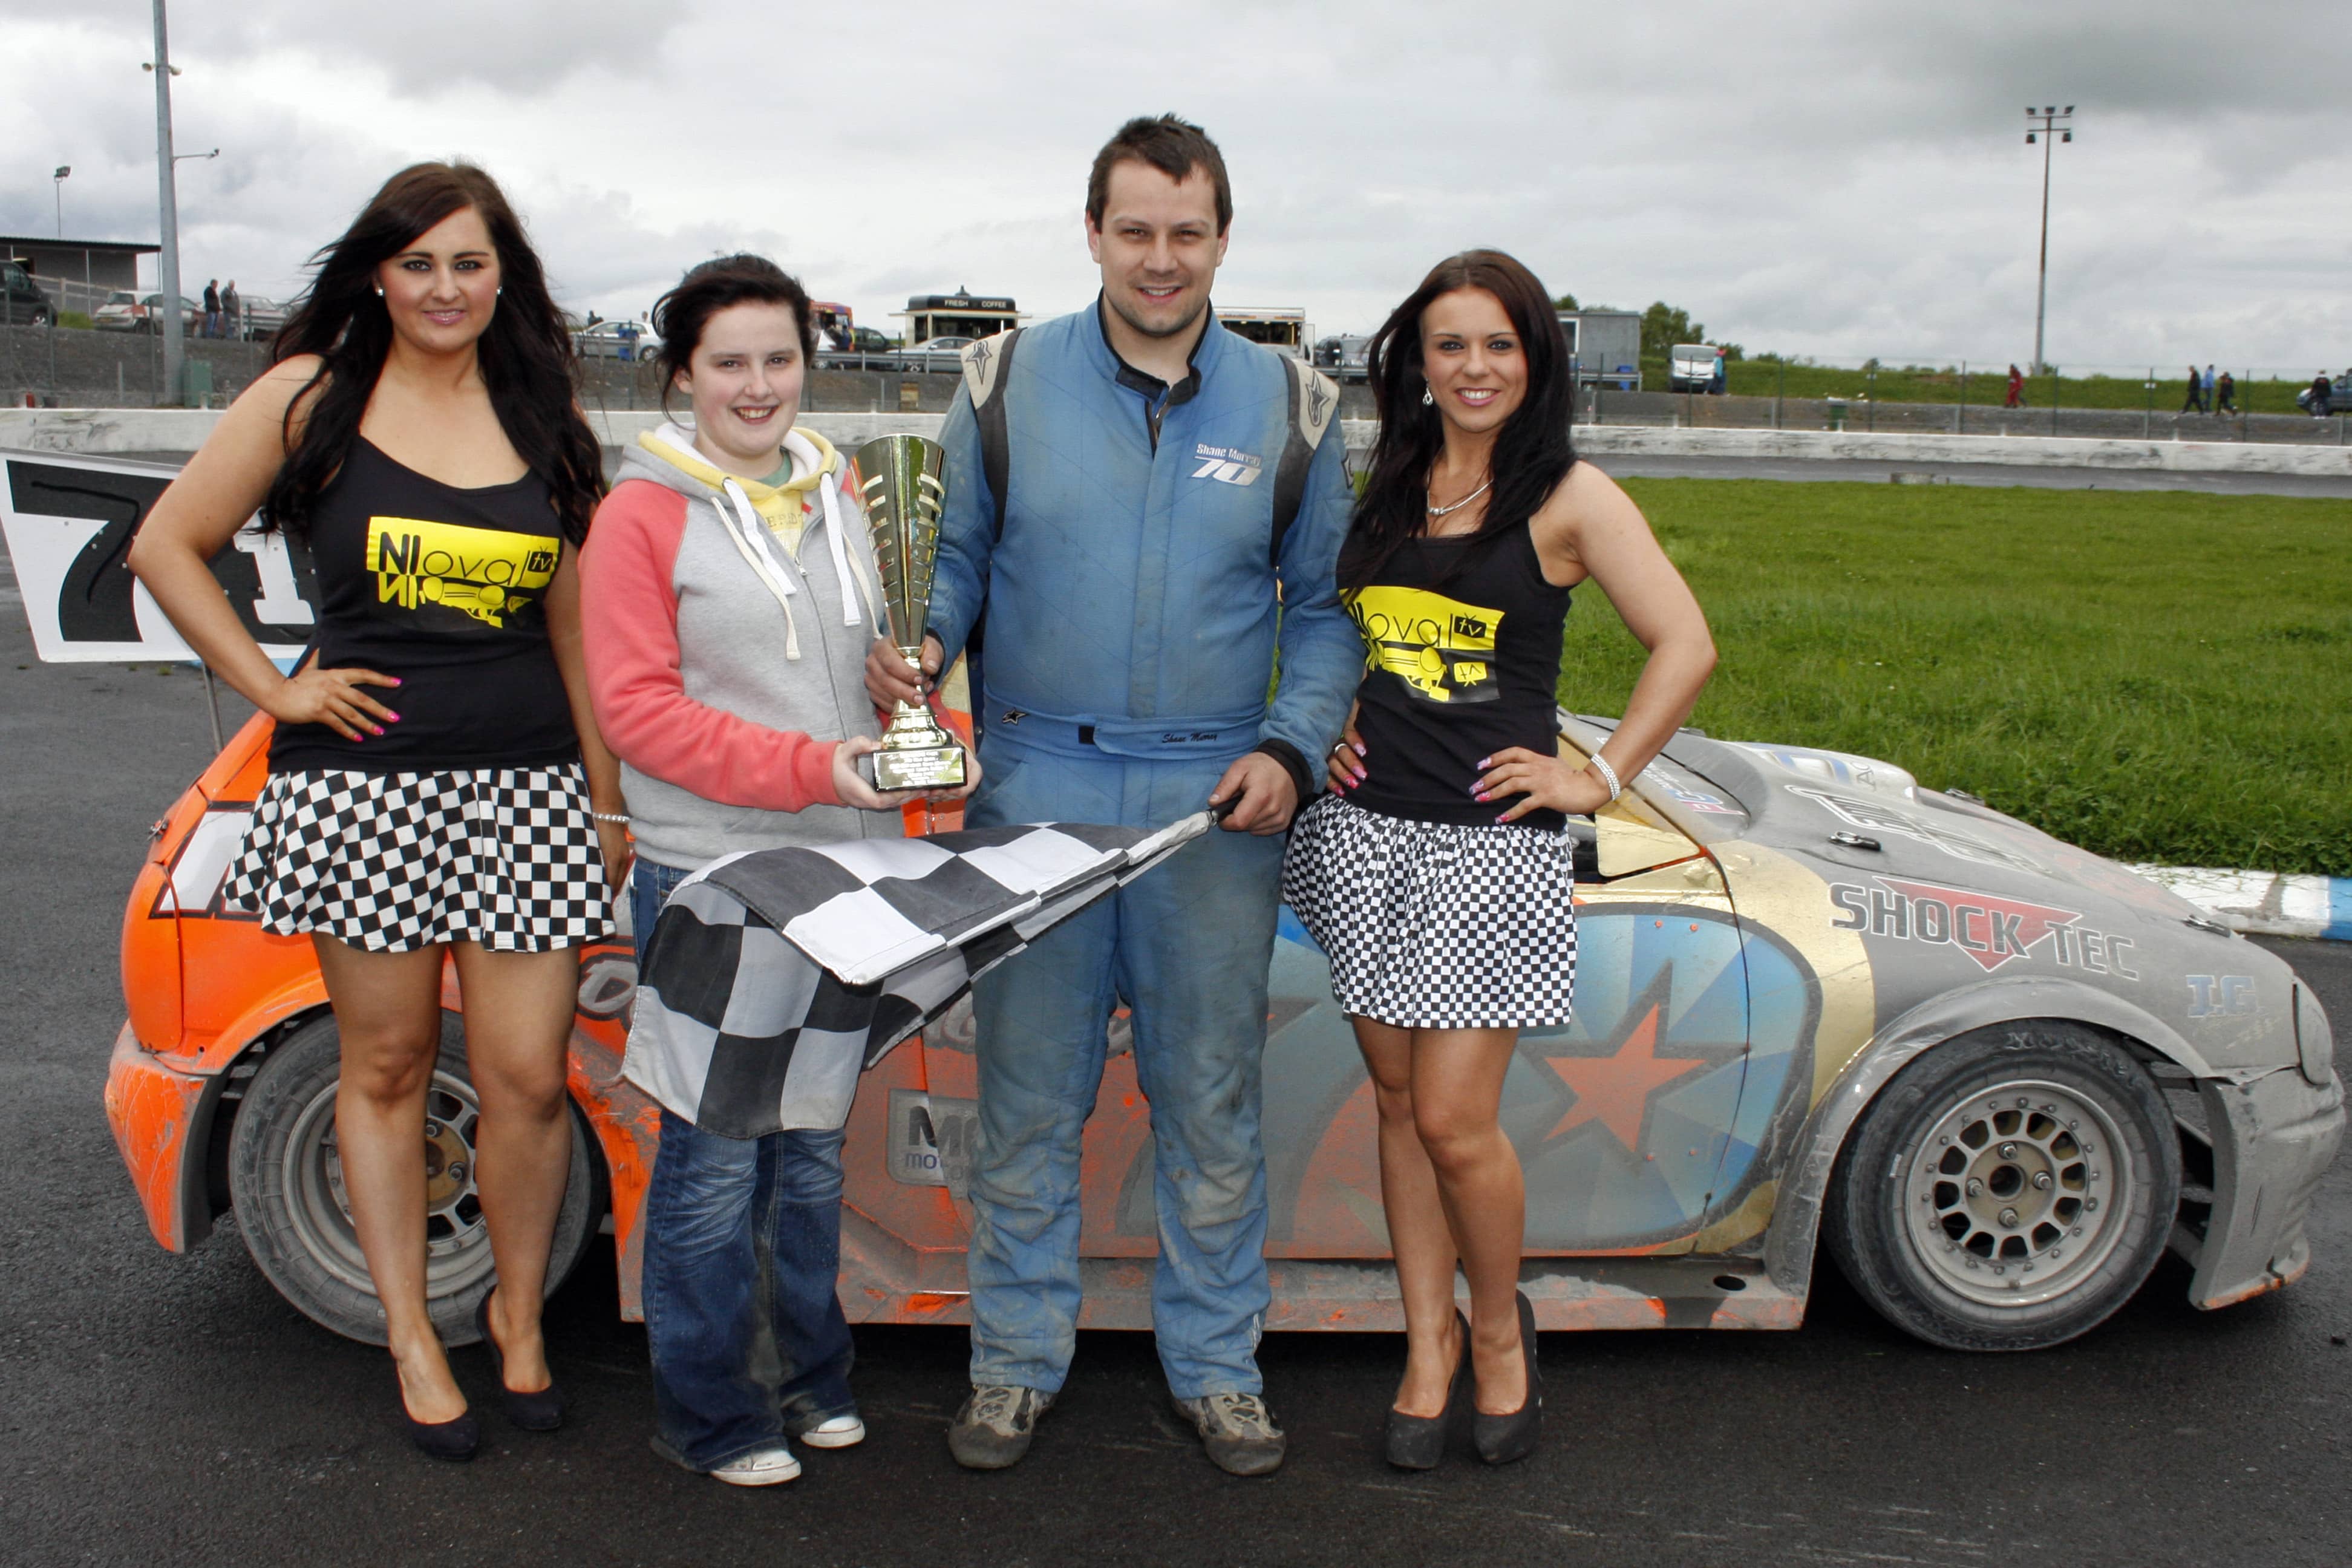 Danielle Hughes Presented the Trophy for the 2 Litre Hot Rods Final to World Champion Shane Murray on behalf of LMC Trade Sales at Tullyroan Oval on Sunday